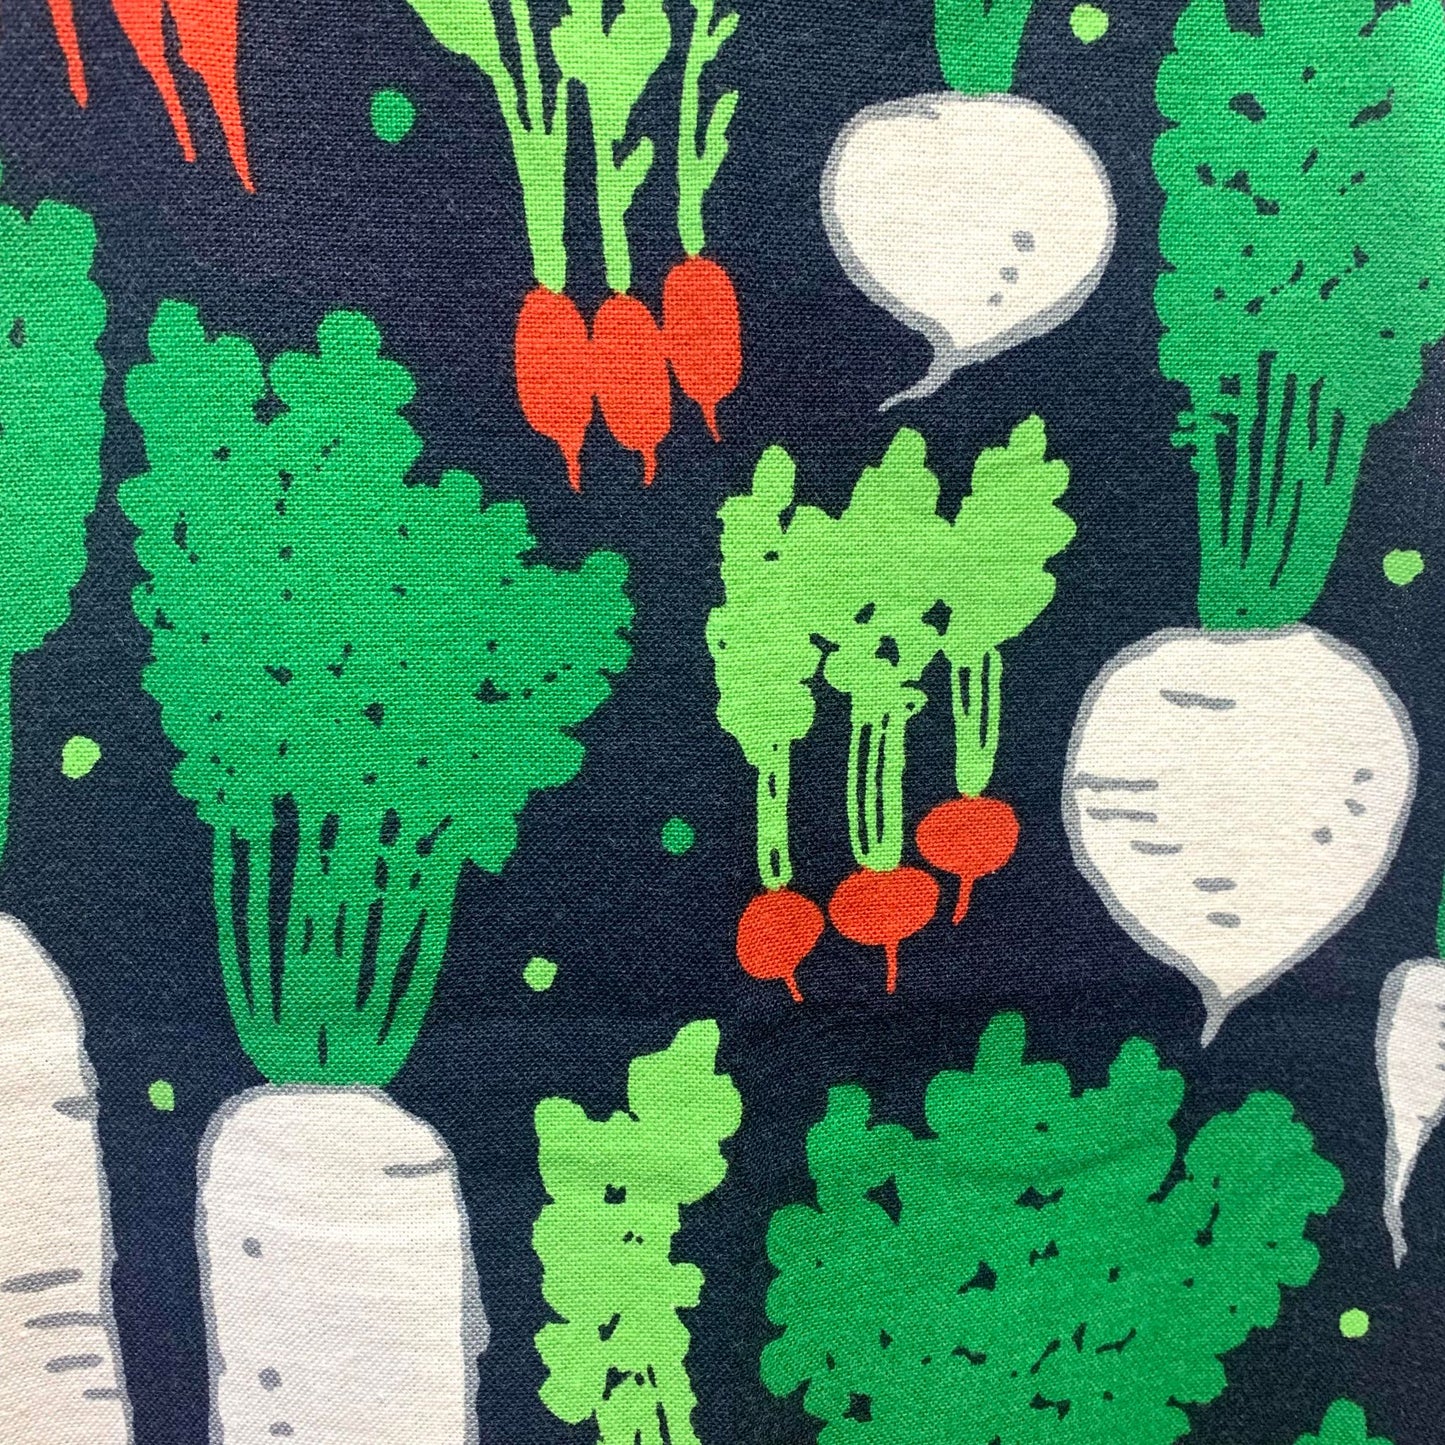 MAKIN' WHOOPEE - "Eat Your Veges" Japanese Fabric Apron